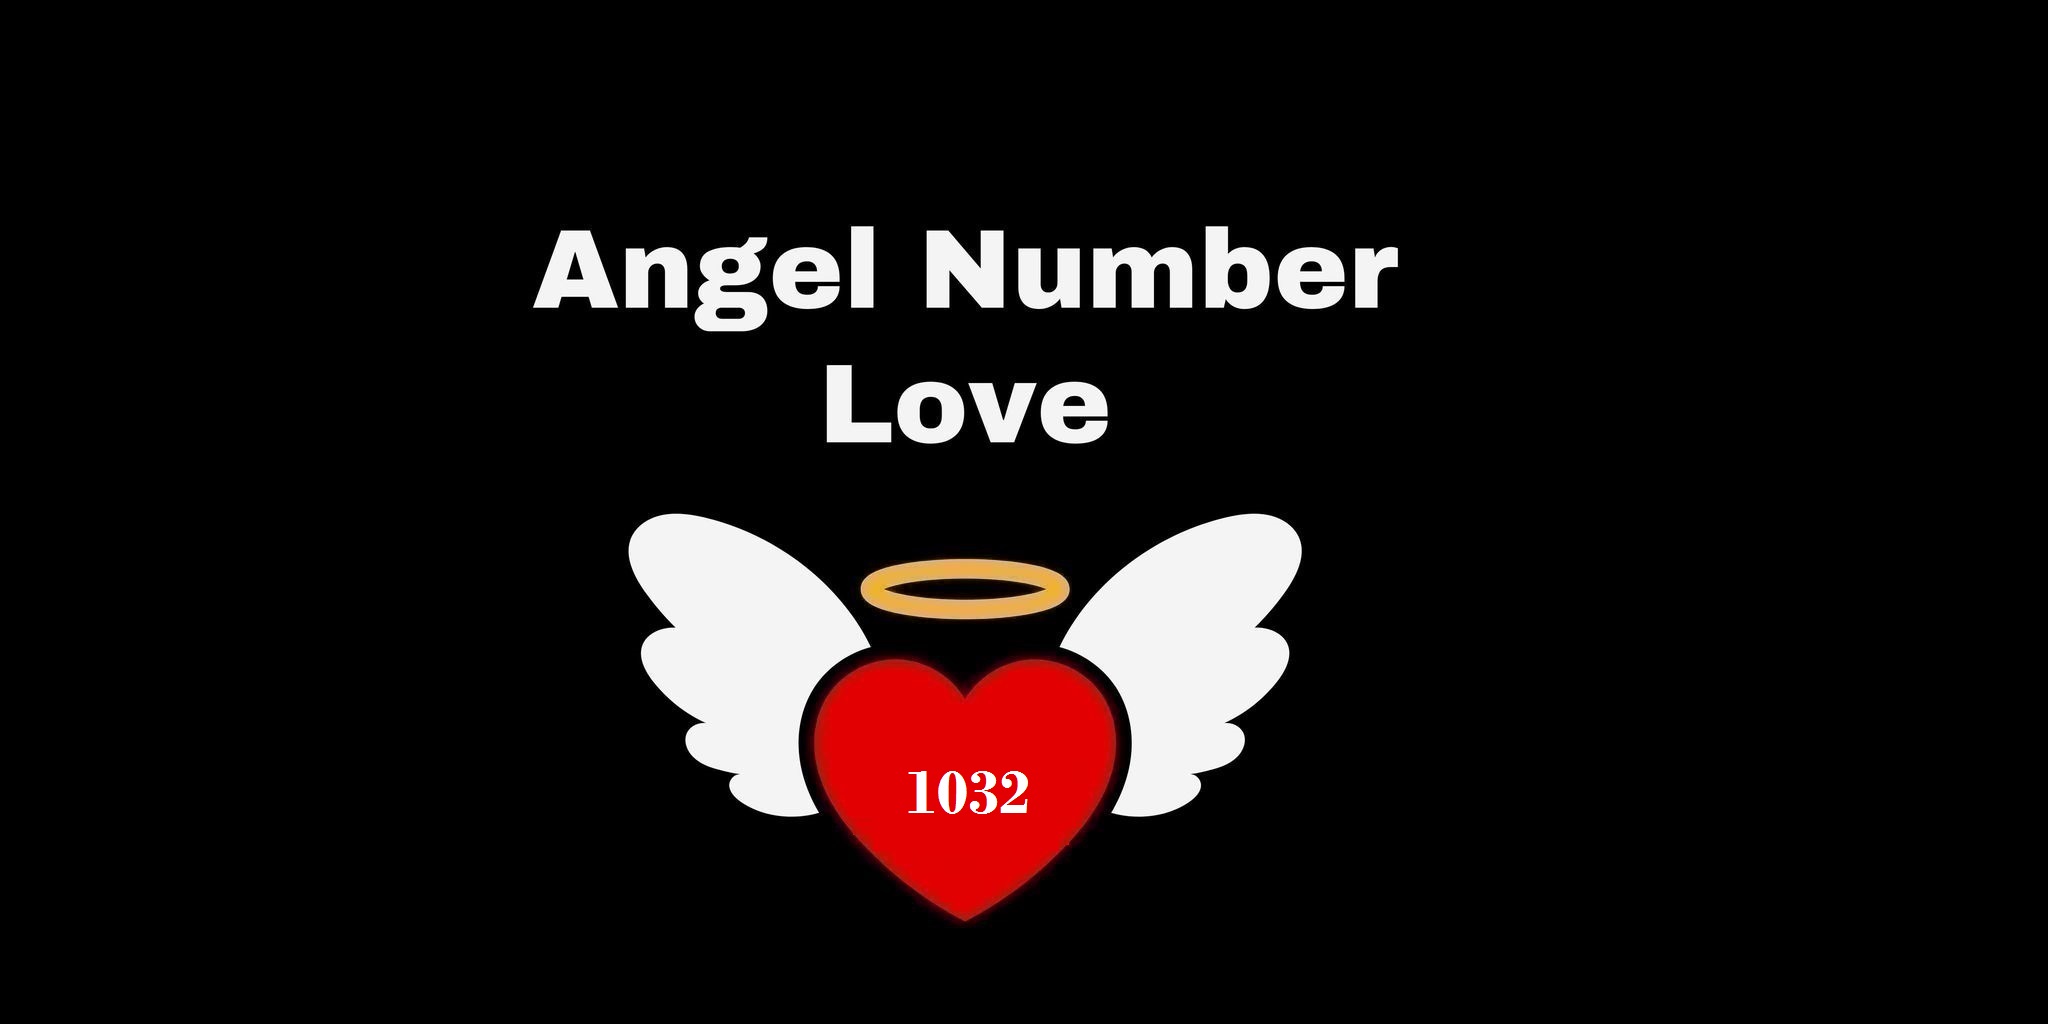 1032 Angel Number Meaning In Love